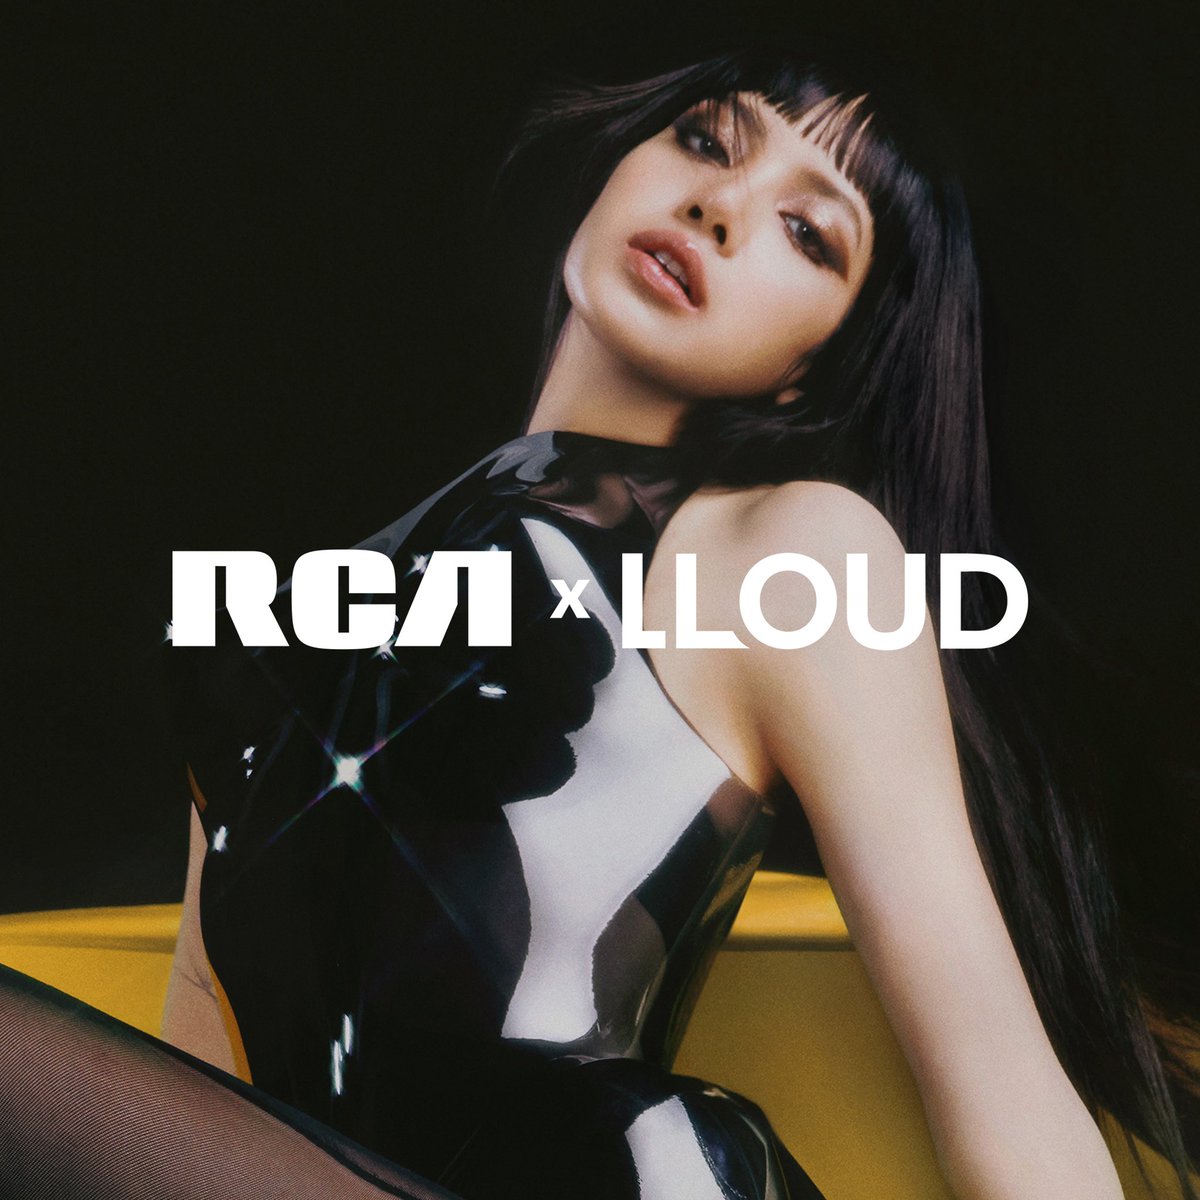 Lisa reveals she has signed with RCA in partnership with LLOUD.